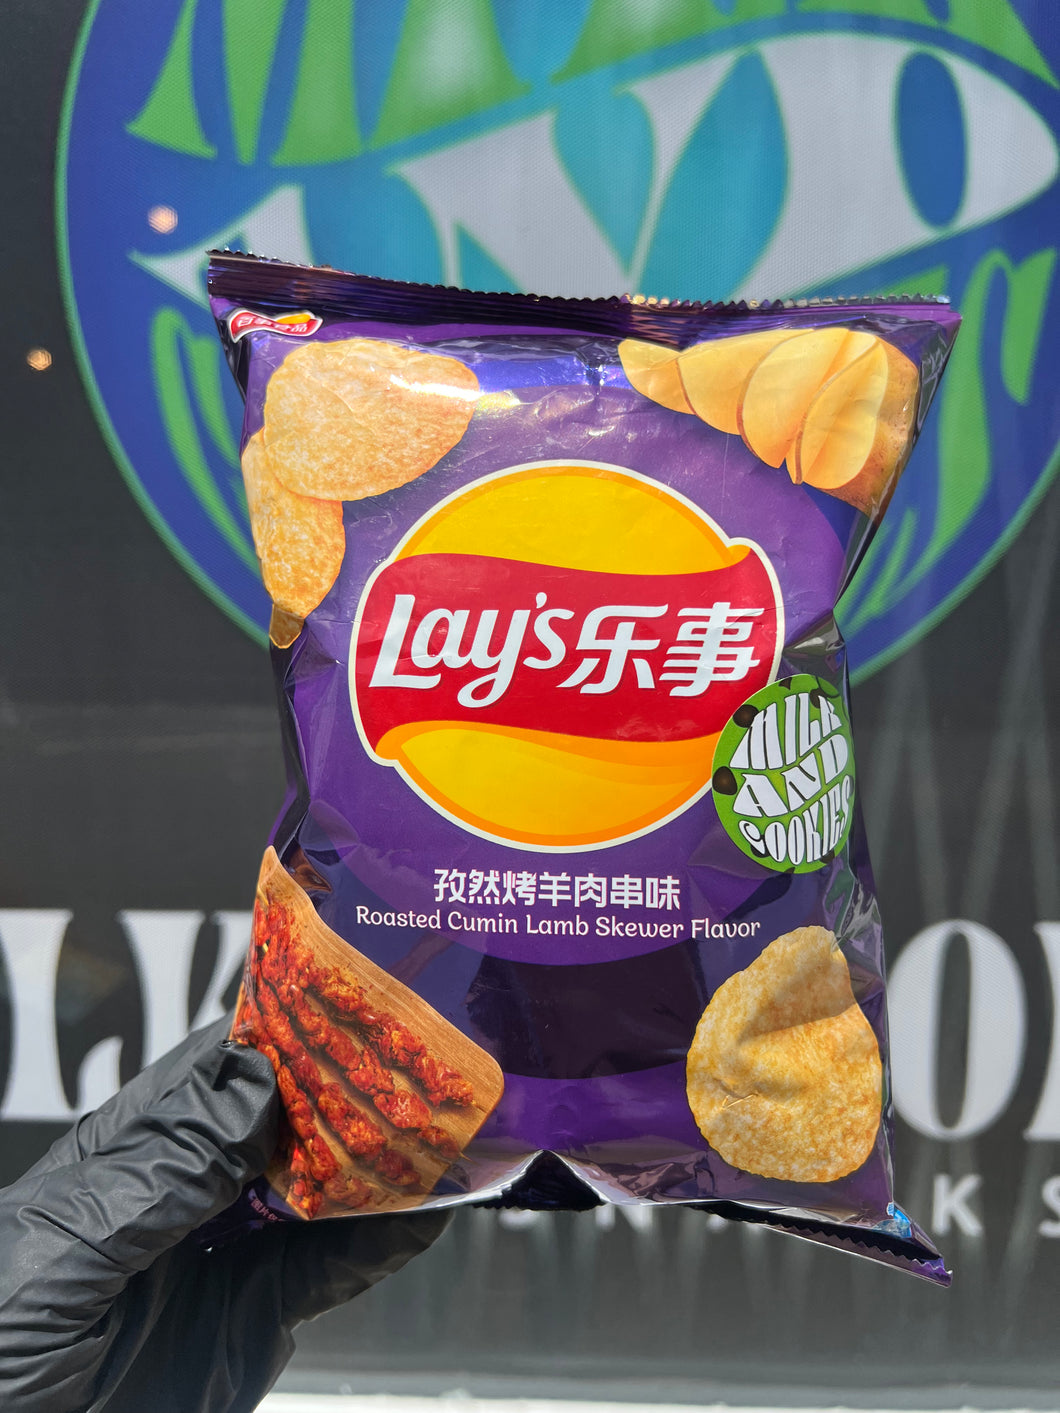 Lay’s Roasted Cumin Lamb Skewer Flavored Chips